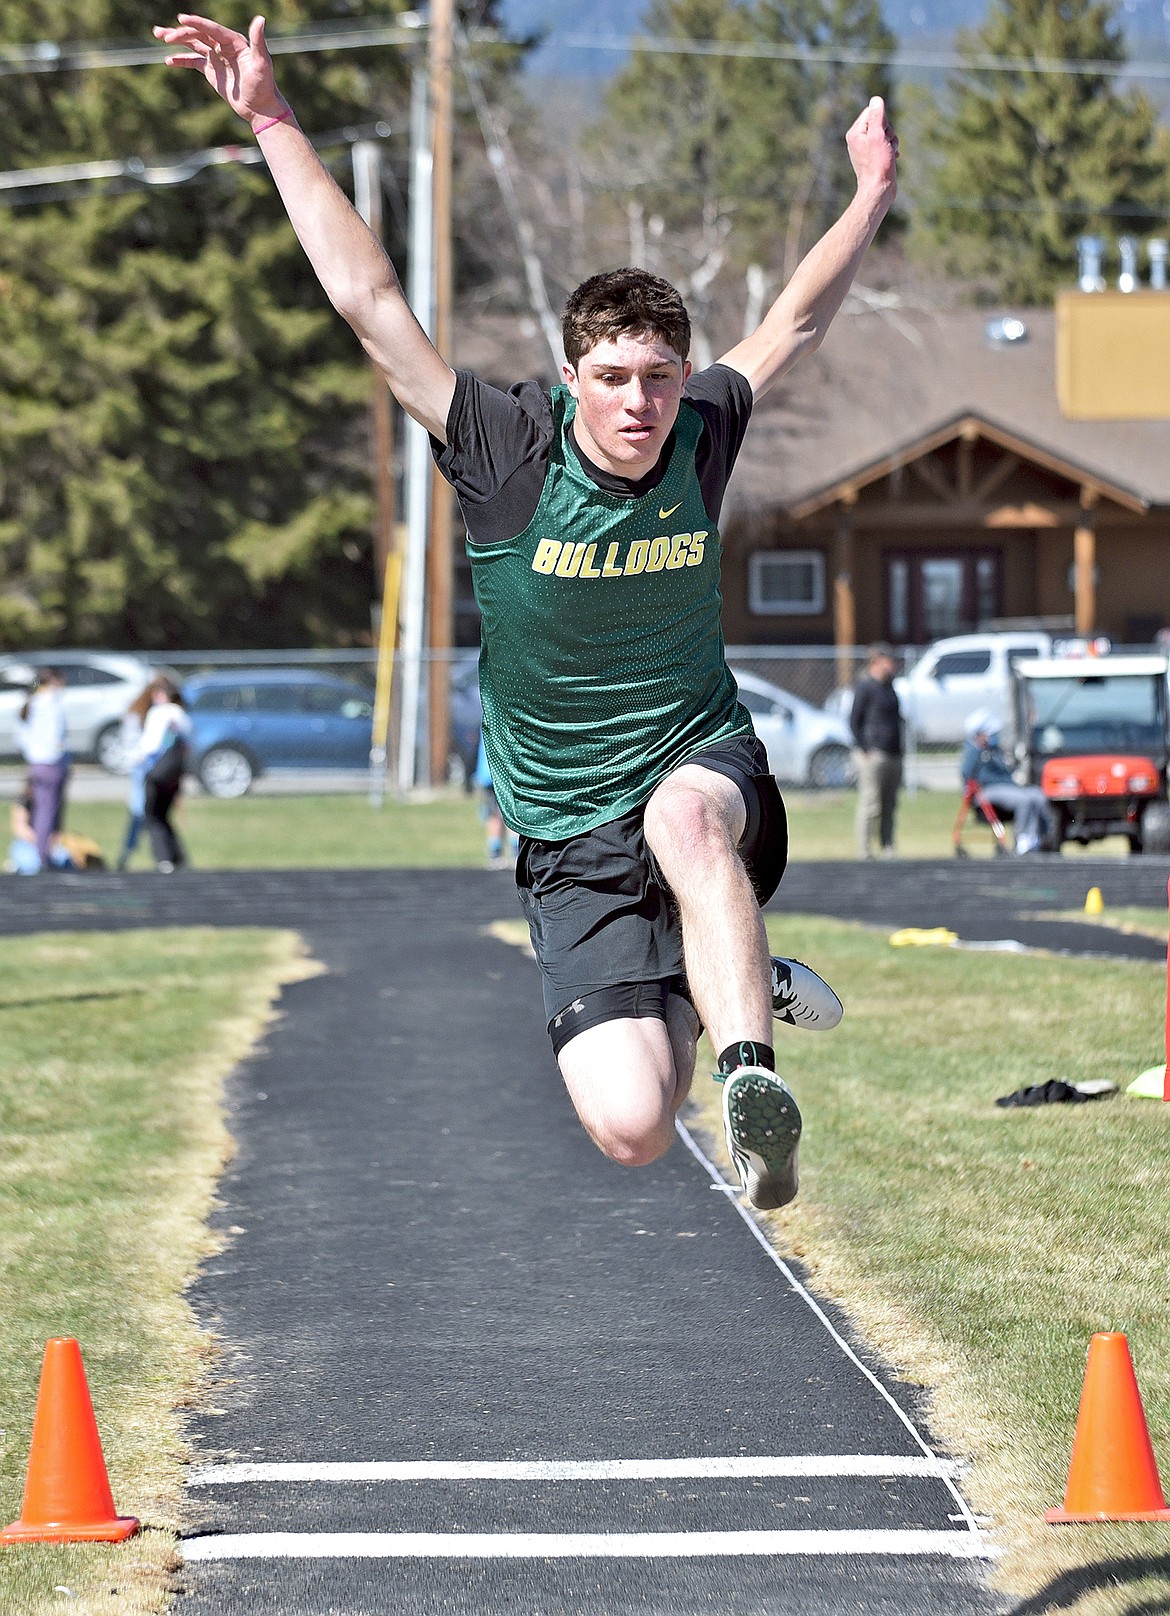 Whitefish's Morgan Kyle takes a big leap in the long jump event at Whitefish High School on Tuesday, April 20. (Whitney England/Whitefish Pilot)